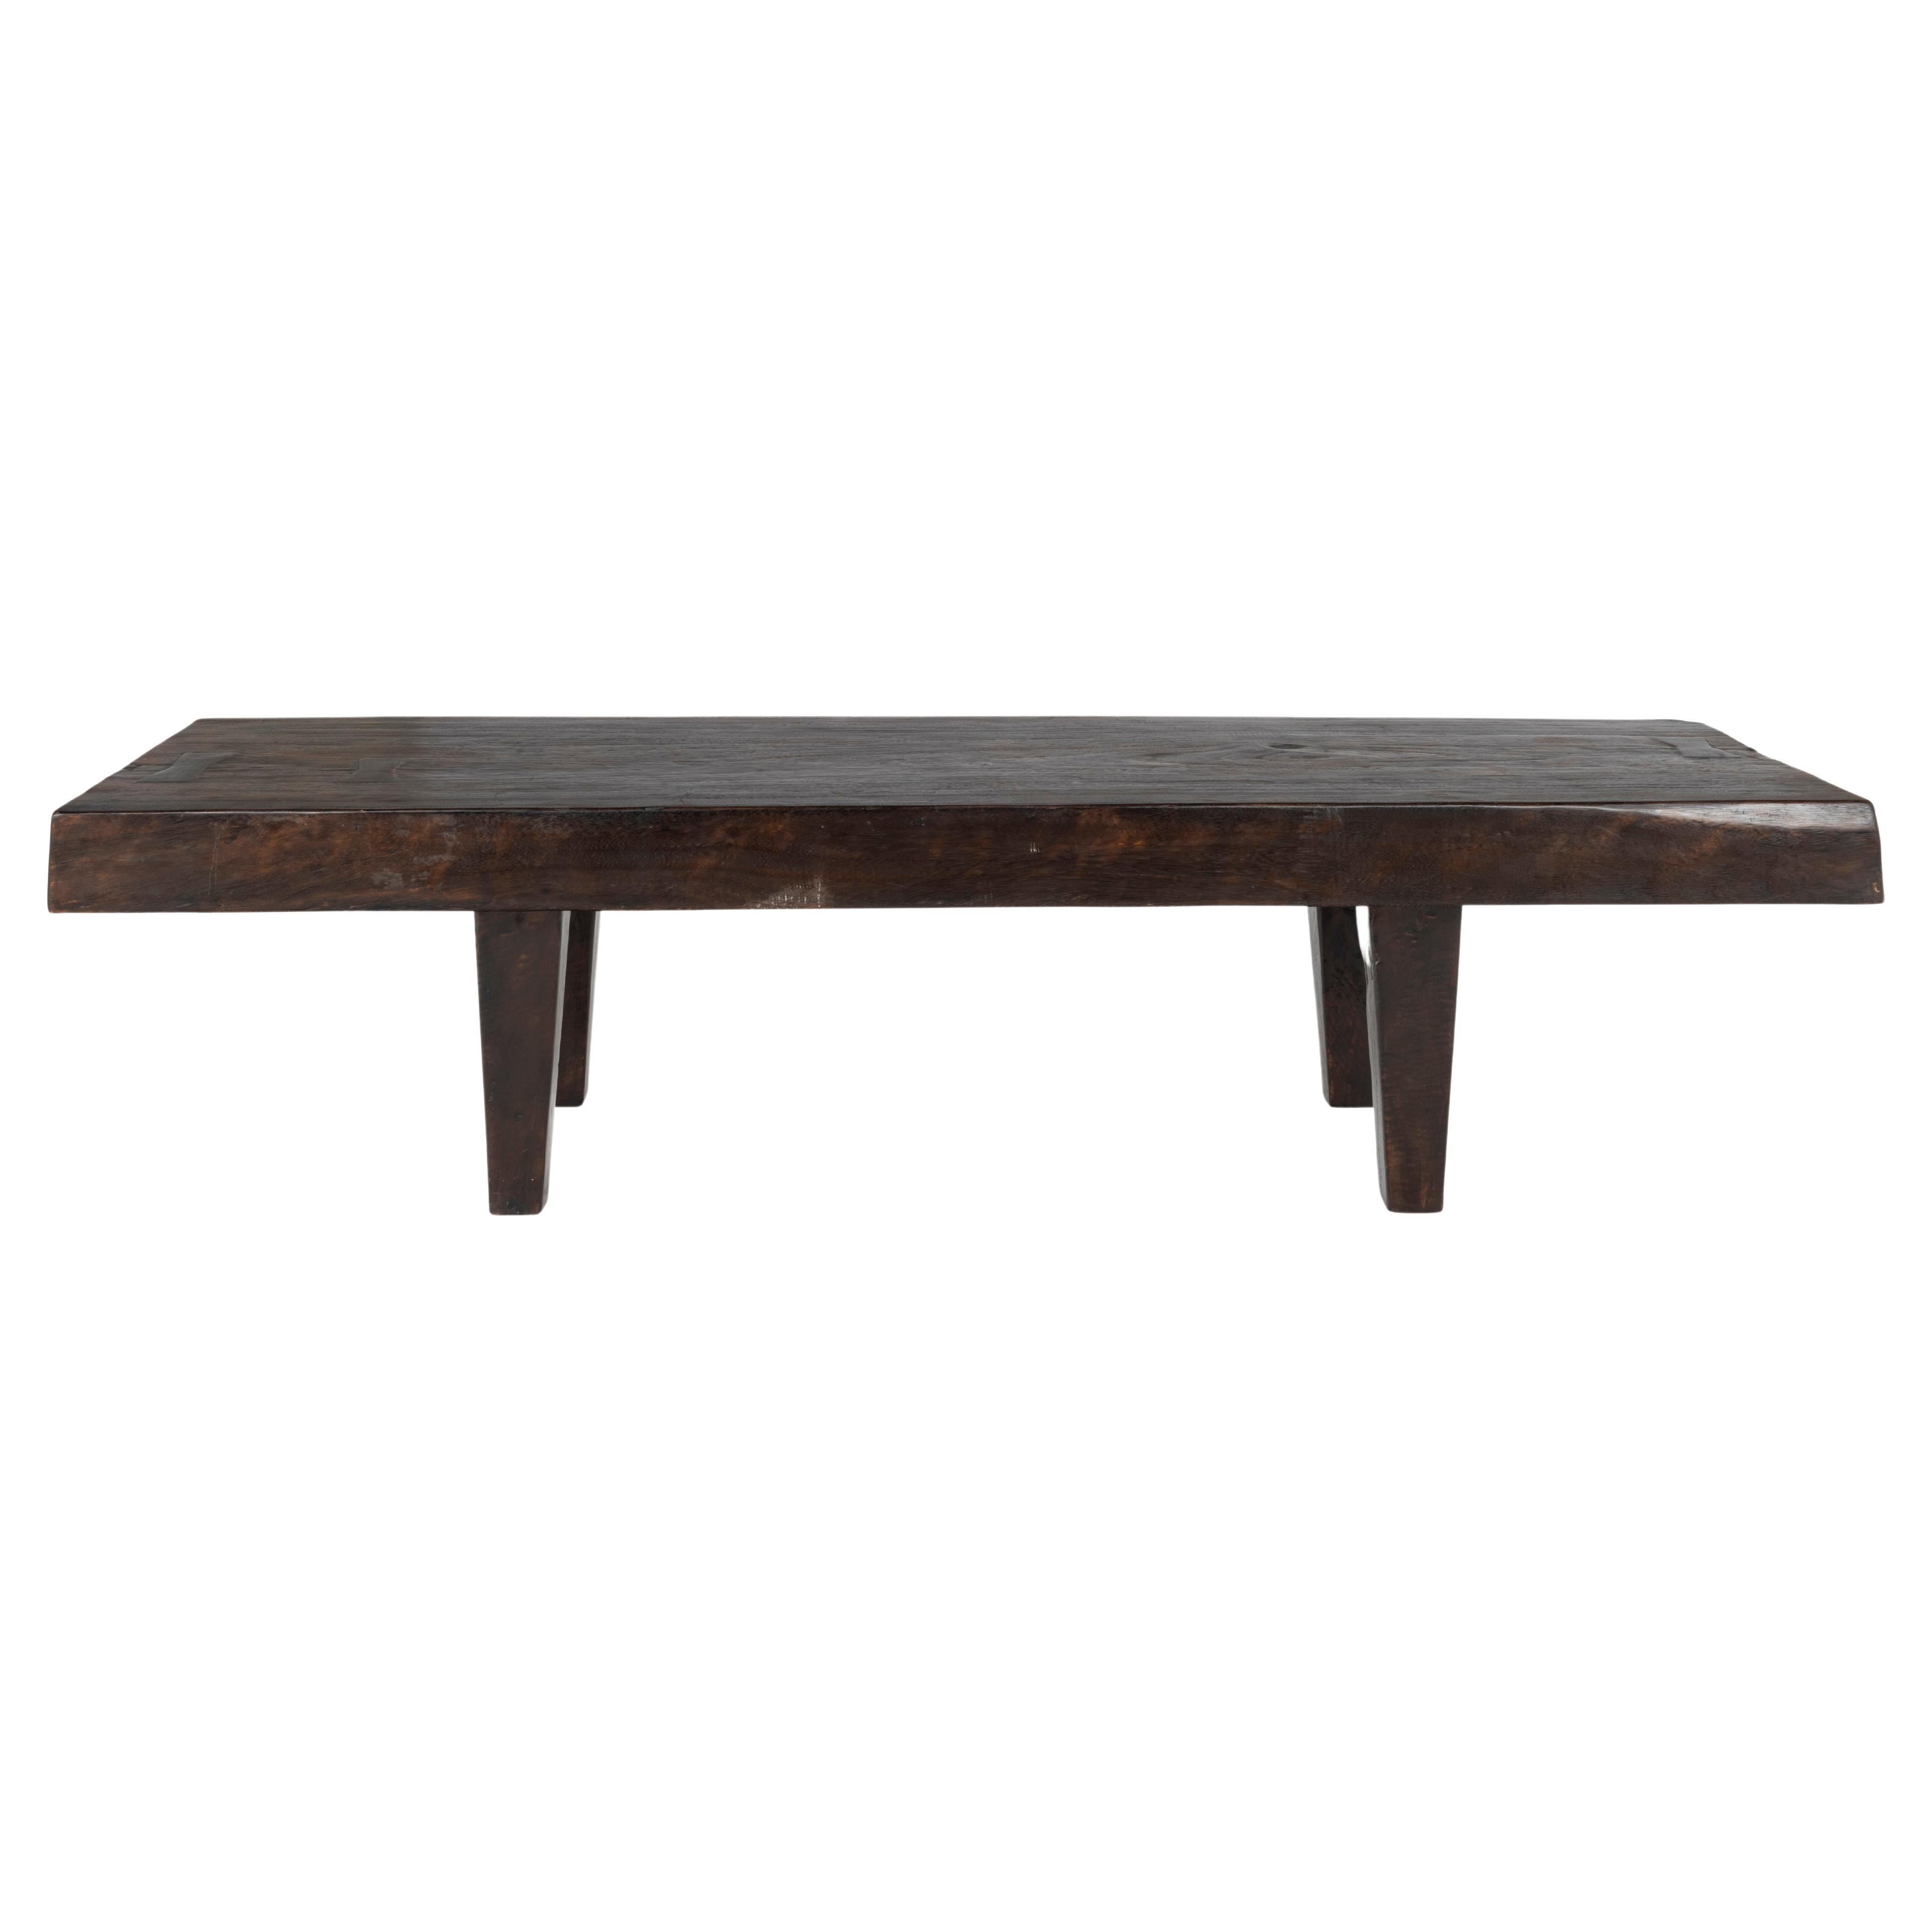 Teak Plank Coffee Table or Bench with Butterfly Inlay Top